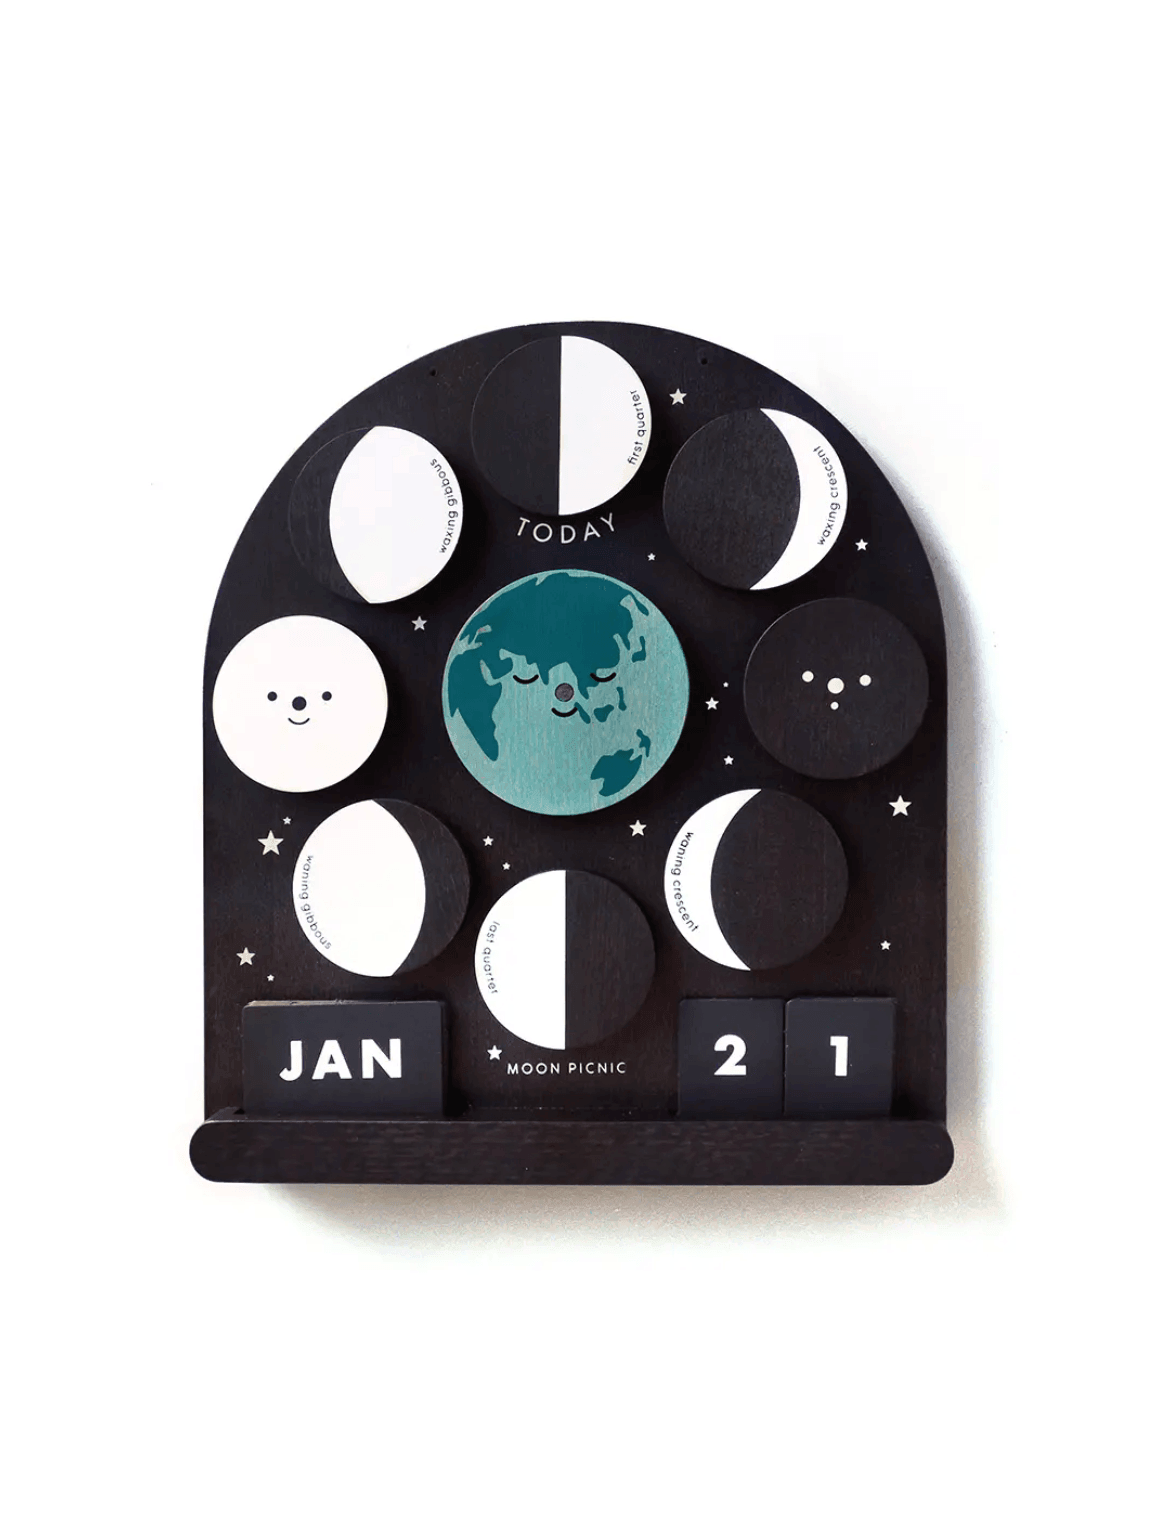 ME AND THE MOON - Moon Phase Calendar - Why and Whale